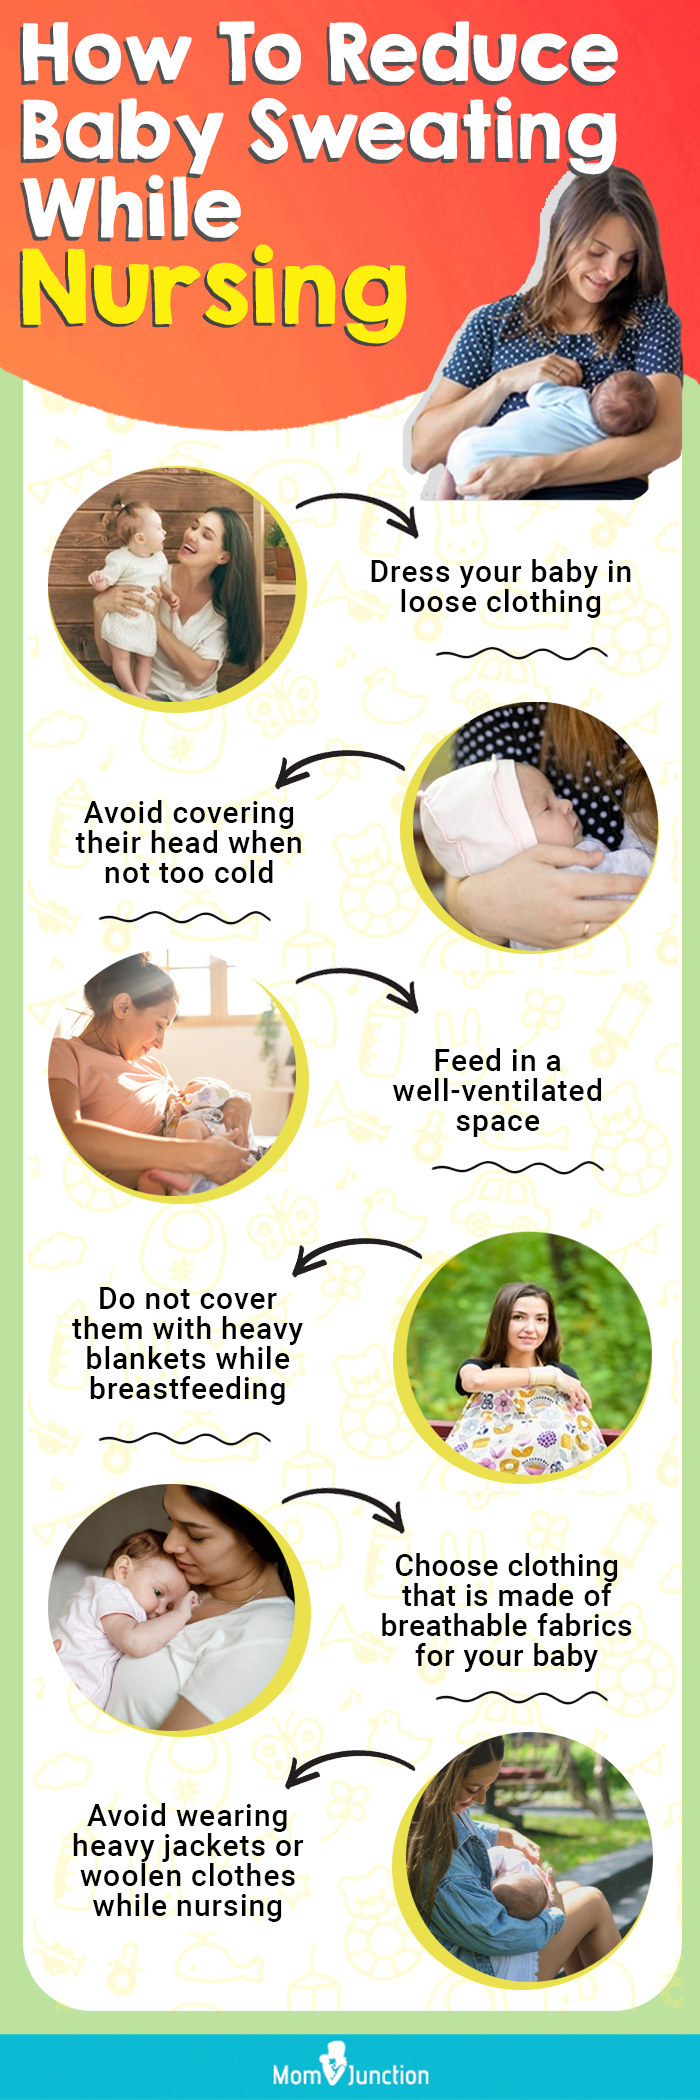 how to reduce baby sweating while nursing (infographic)